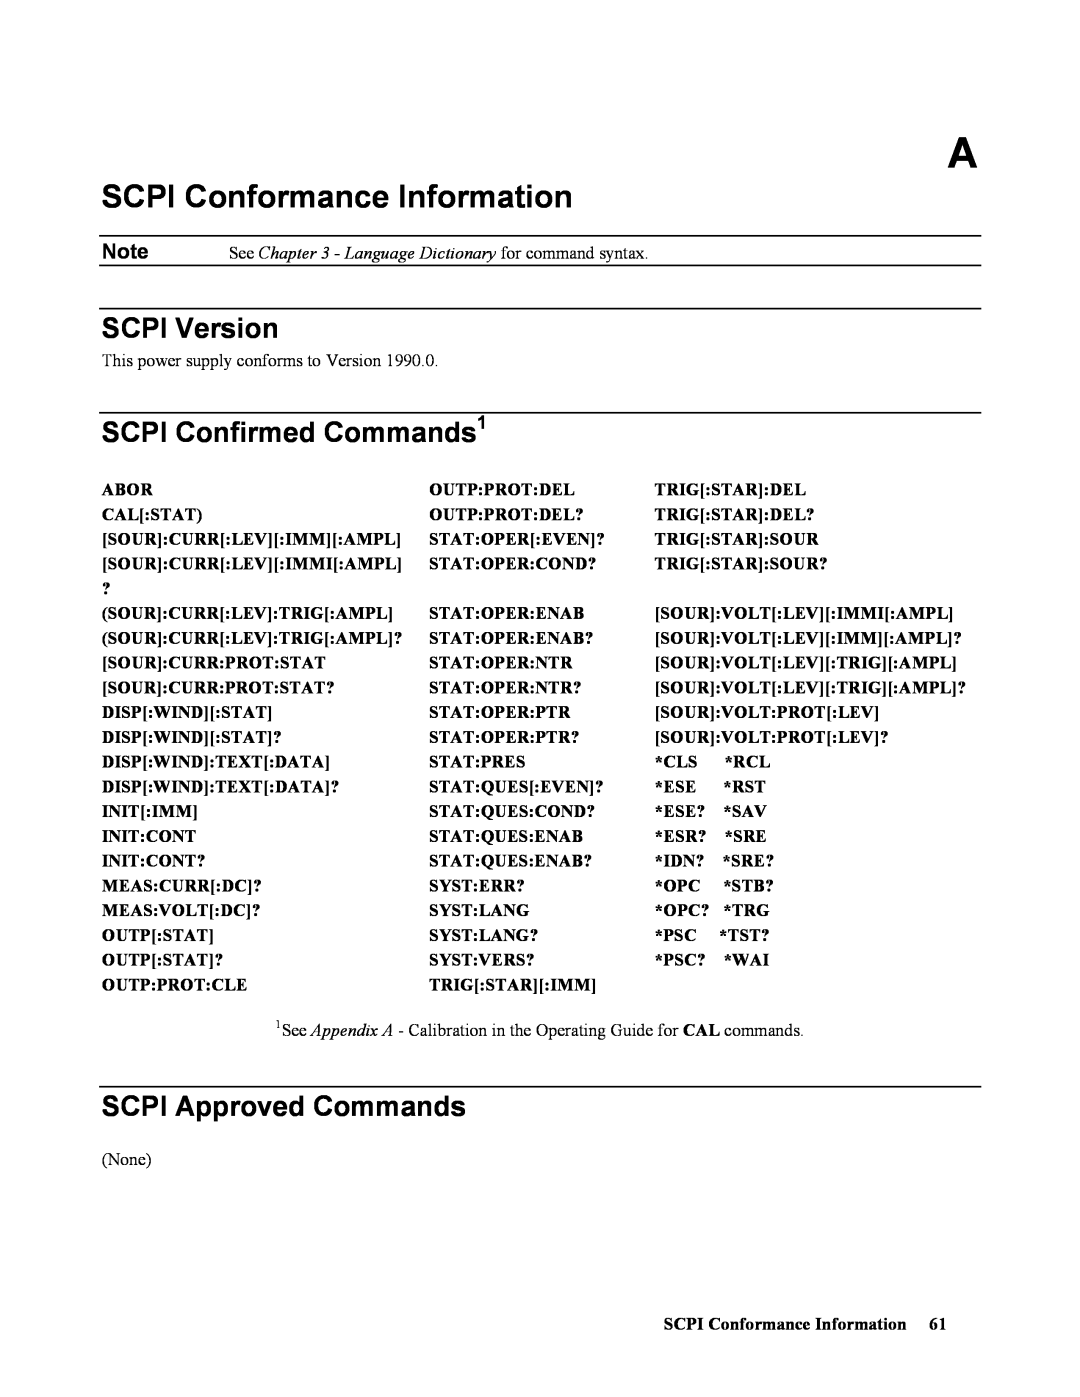 Agilent Technologies 669xA SCPI Conformance Information, SCPI Version, SCPI Confirmed Commands1, SCPI Approved Commands 